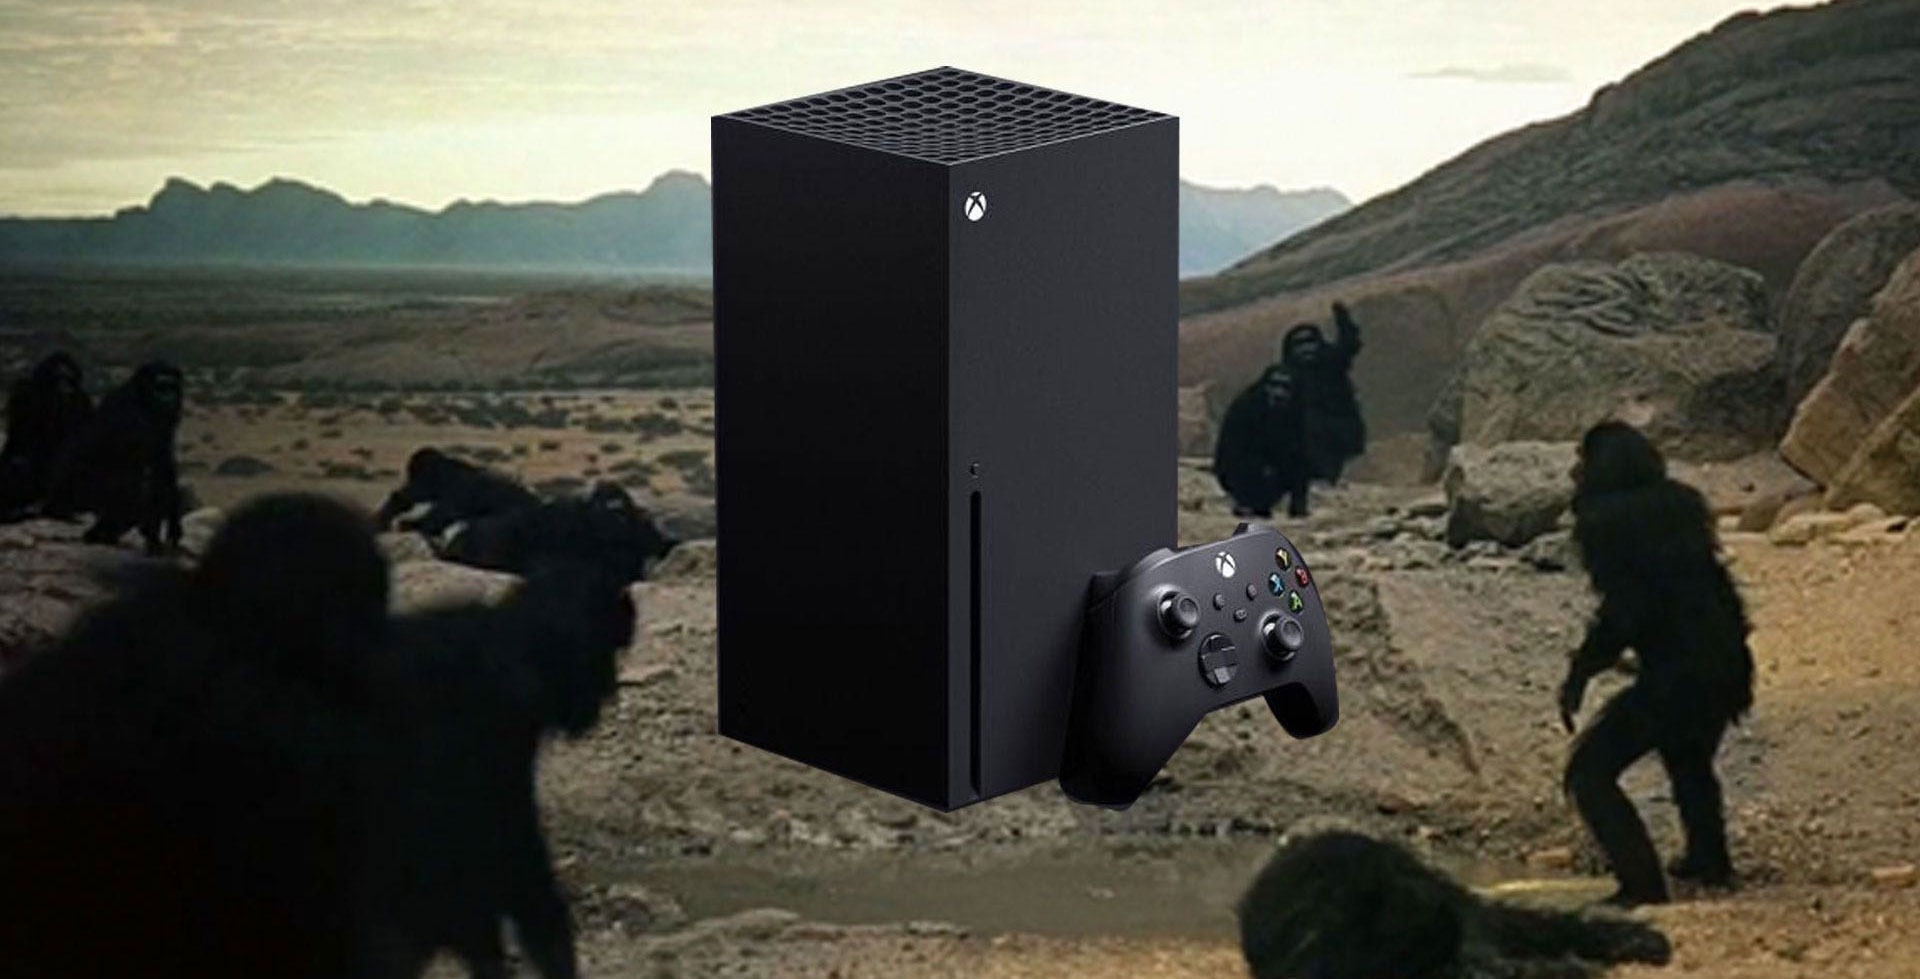 What Are Your Thoughts On The Xbox Series X S Design